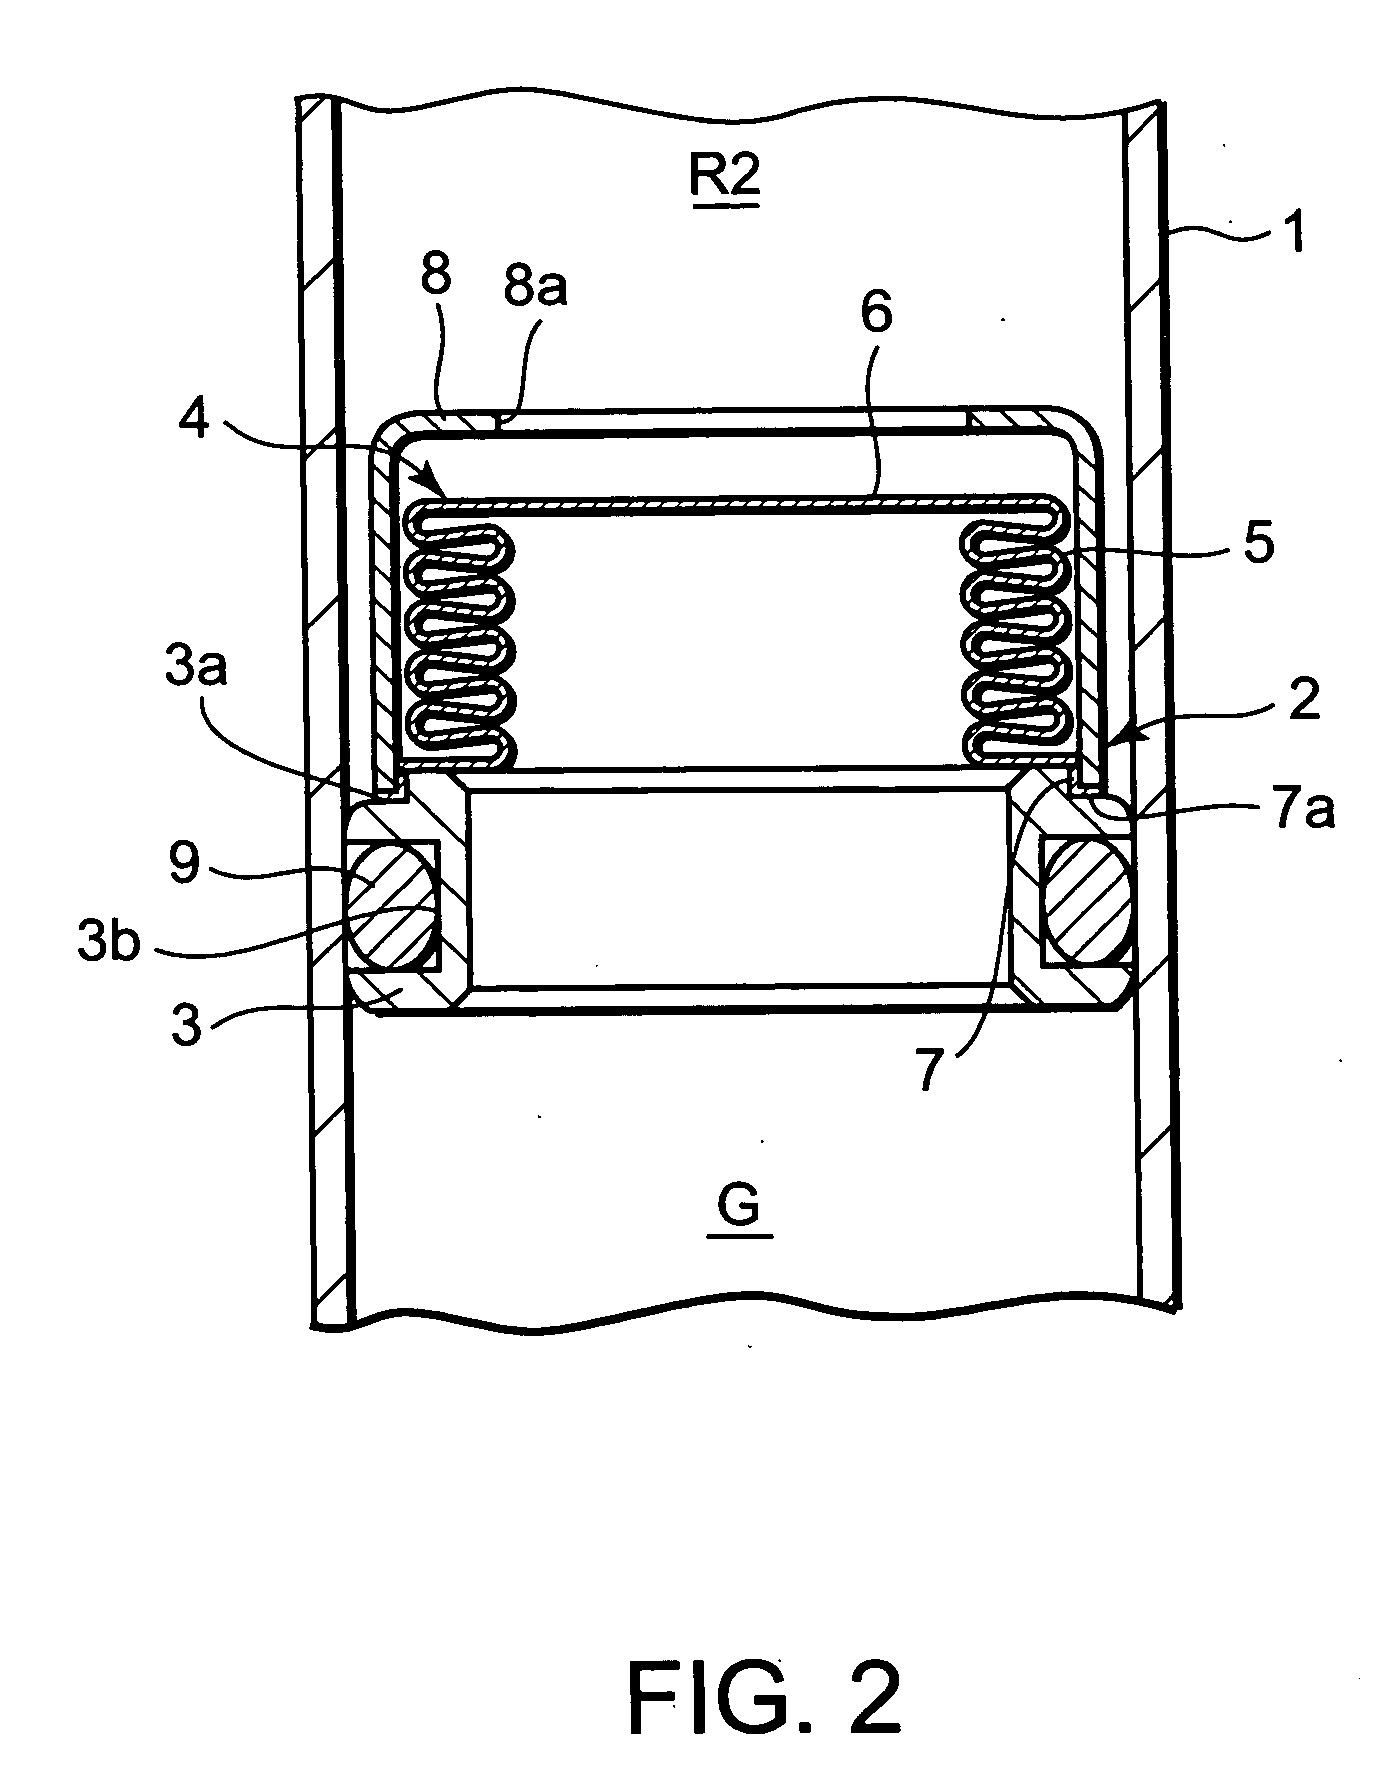 Hydraulic equipment with built-in free piston